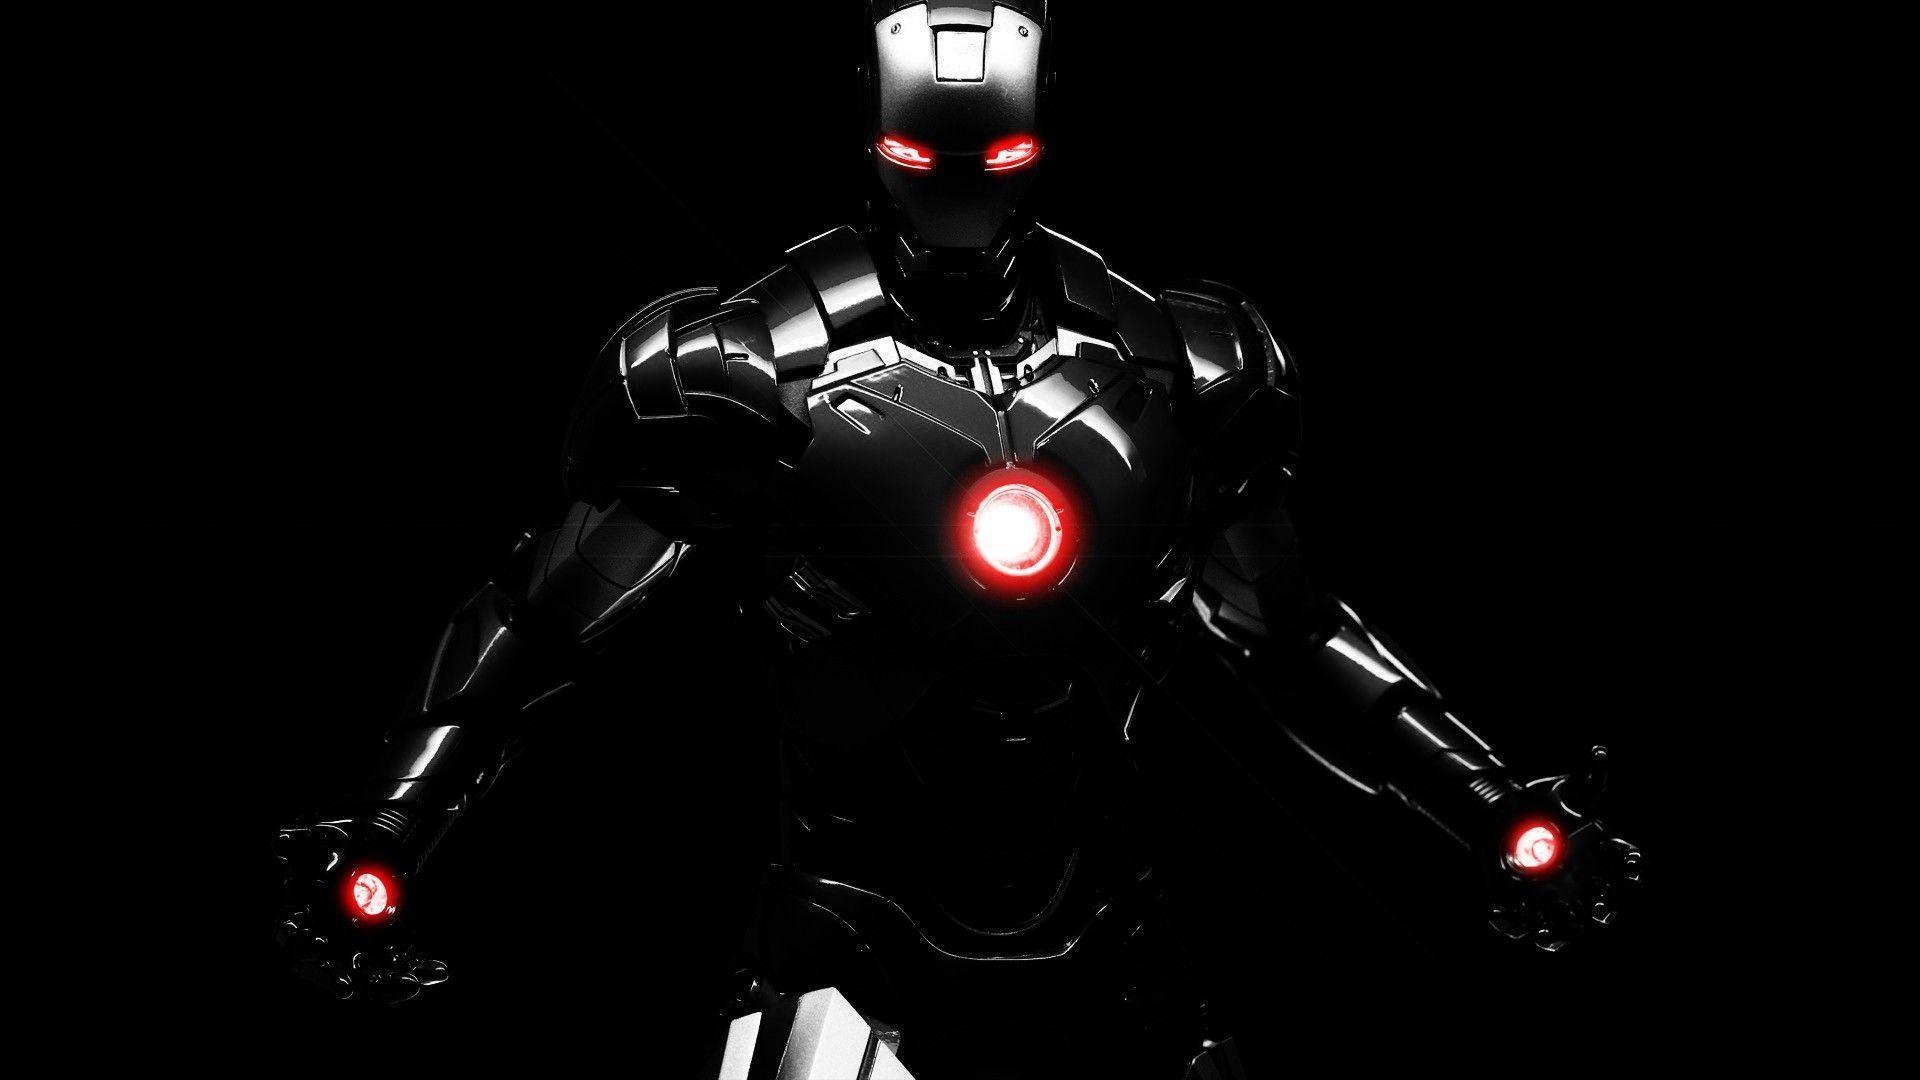 Iron Man Jarvis Wallpaper Android, Movie Wallpaper